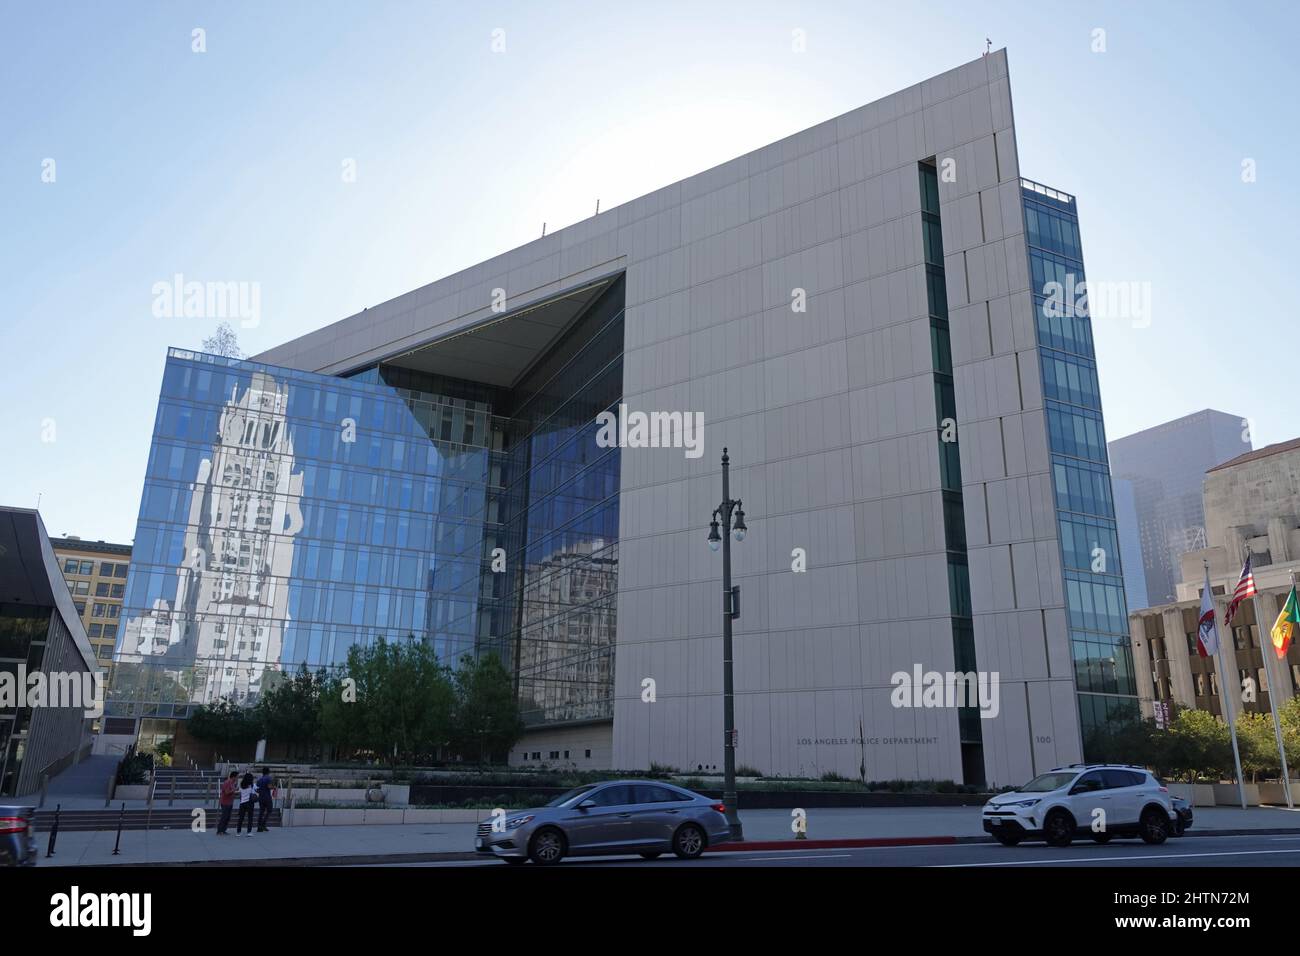 Los Angeles, CA / USA - Sept. 23, 2018: The L.A. Police Department headquarters is shown in downtown, with the City Hall building reflecting. Stock Photo